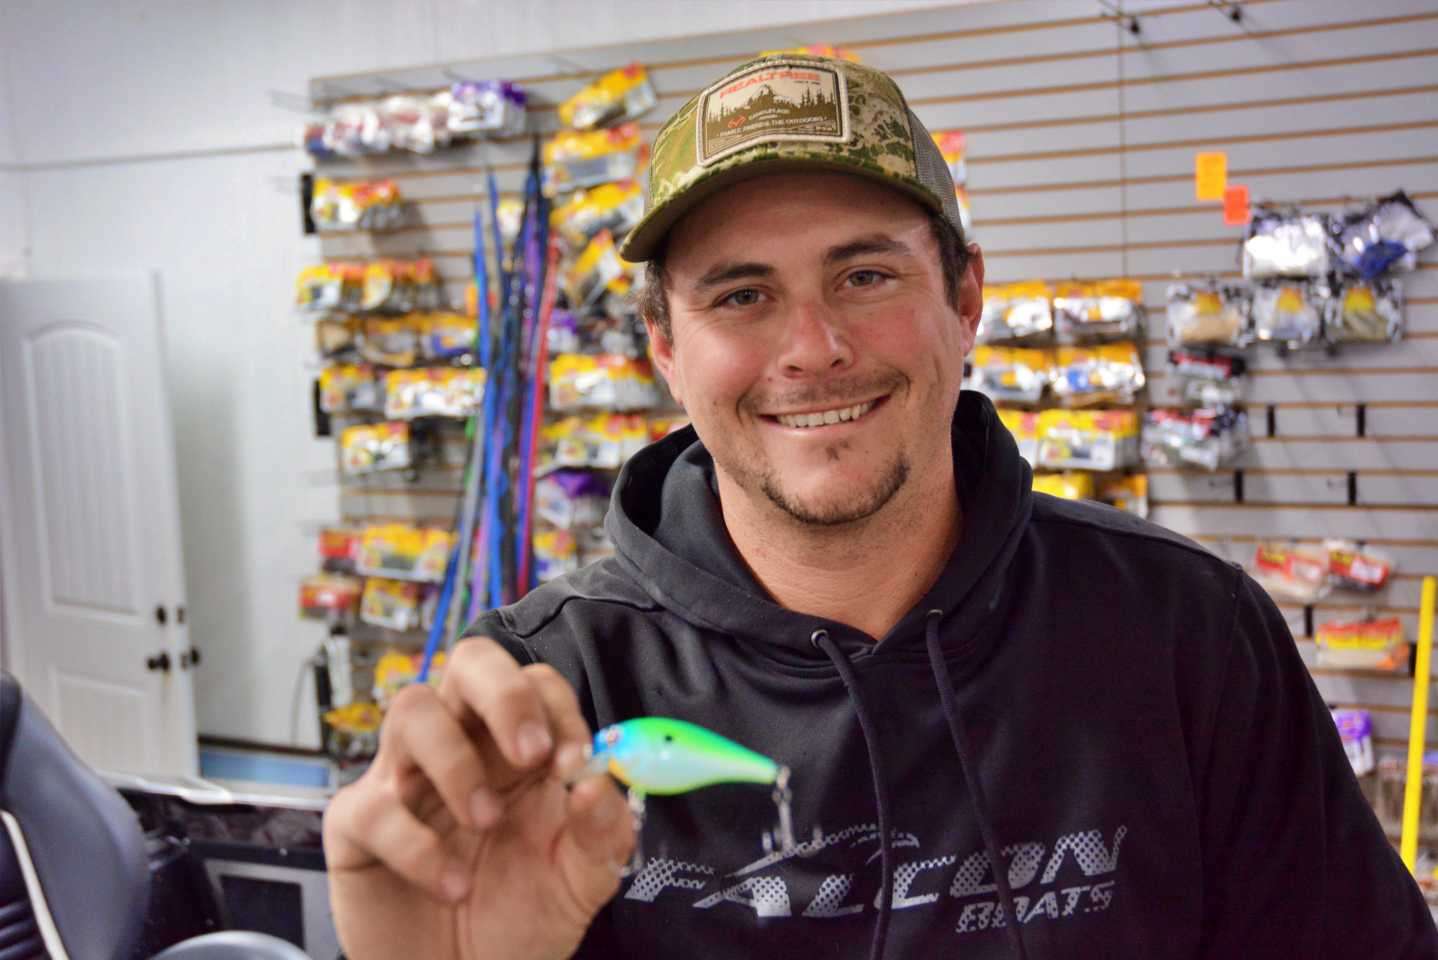 Next to go in the box is a Berkley Squarebull 5.5, a 2 3/8-inch bait weighing 3/8 ounce and designed to run 3- to 6-feet deep. âYou can fish it from the bank, and itâs designed to make contact with cover,â he said. âItâs just a good all-around bait for getting their attention.â 